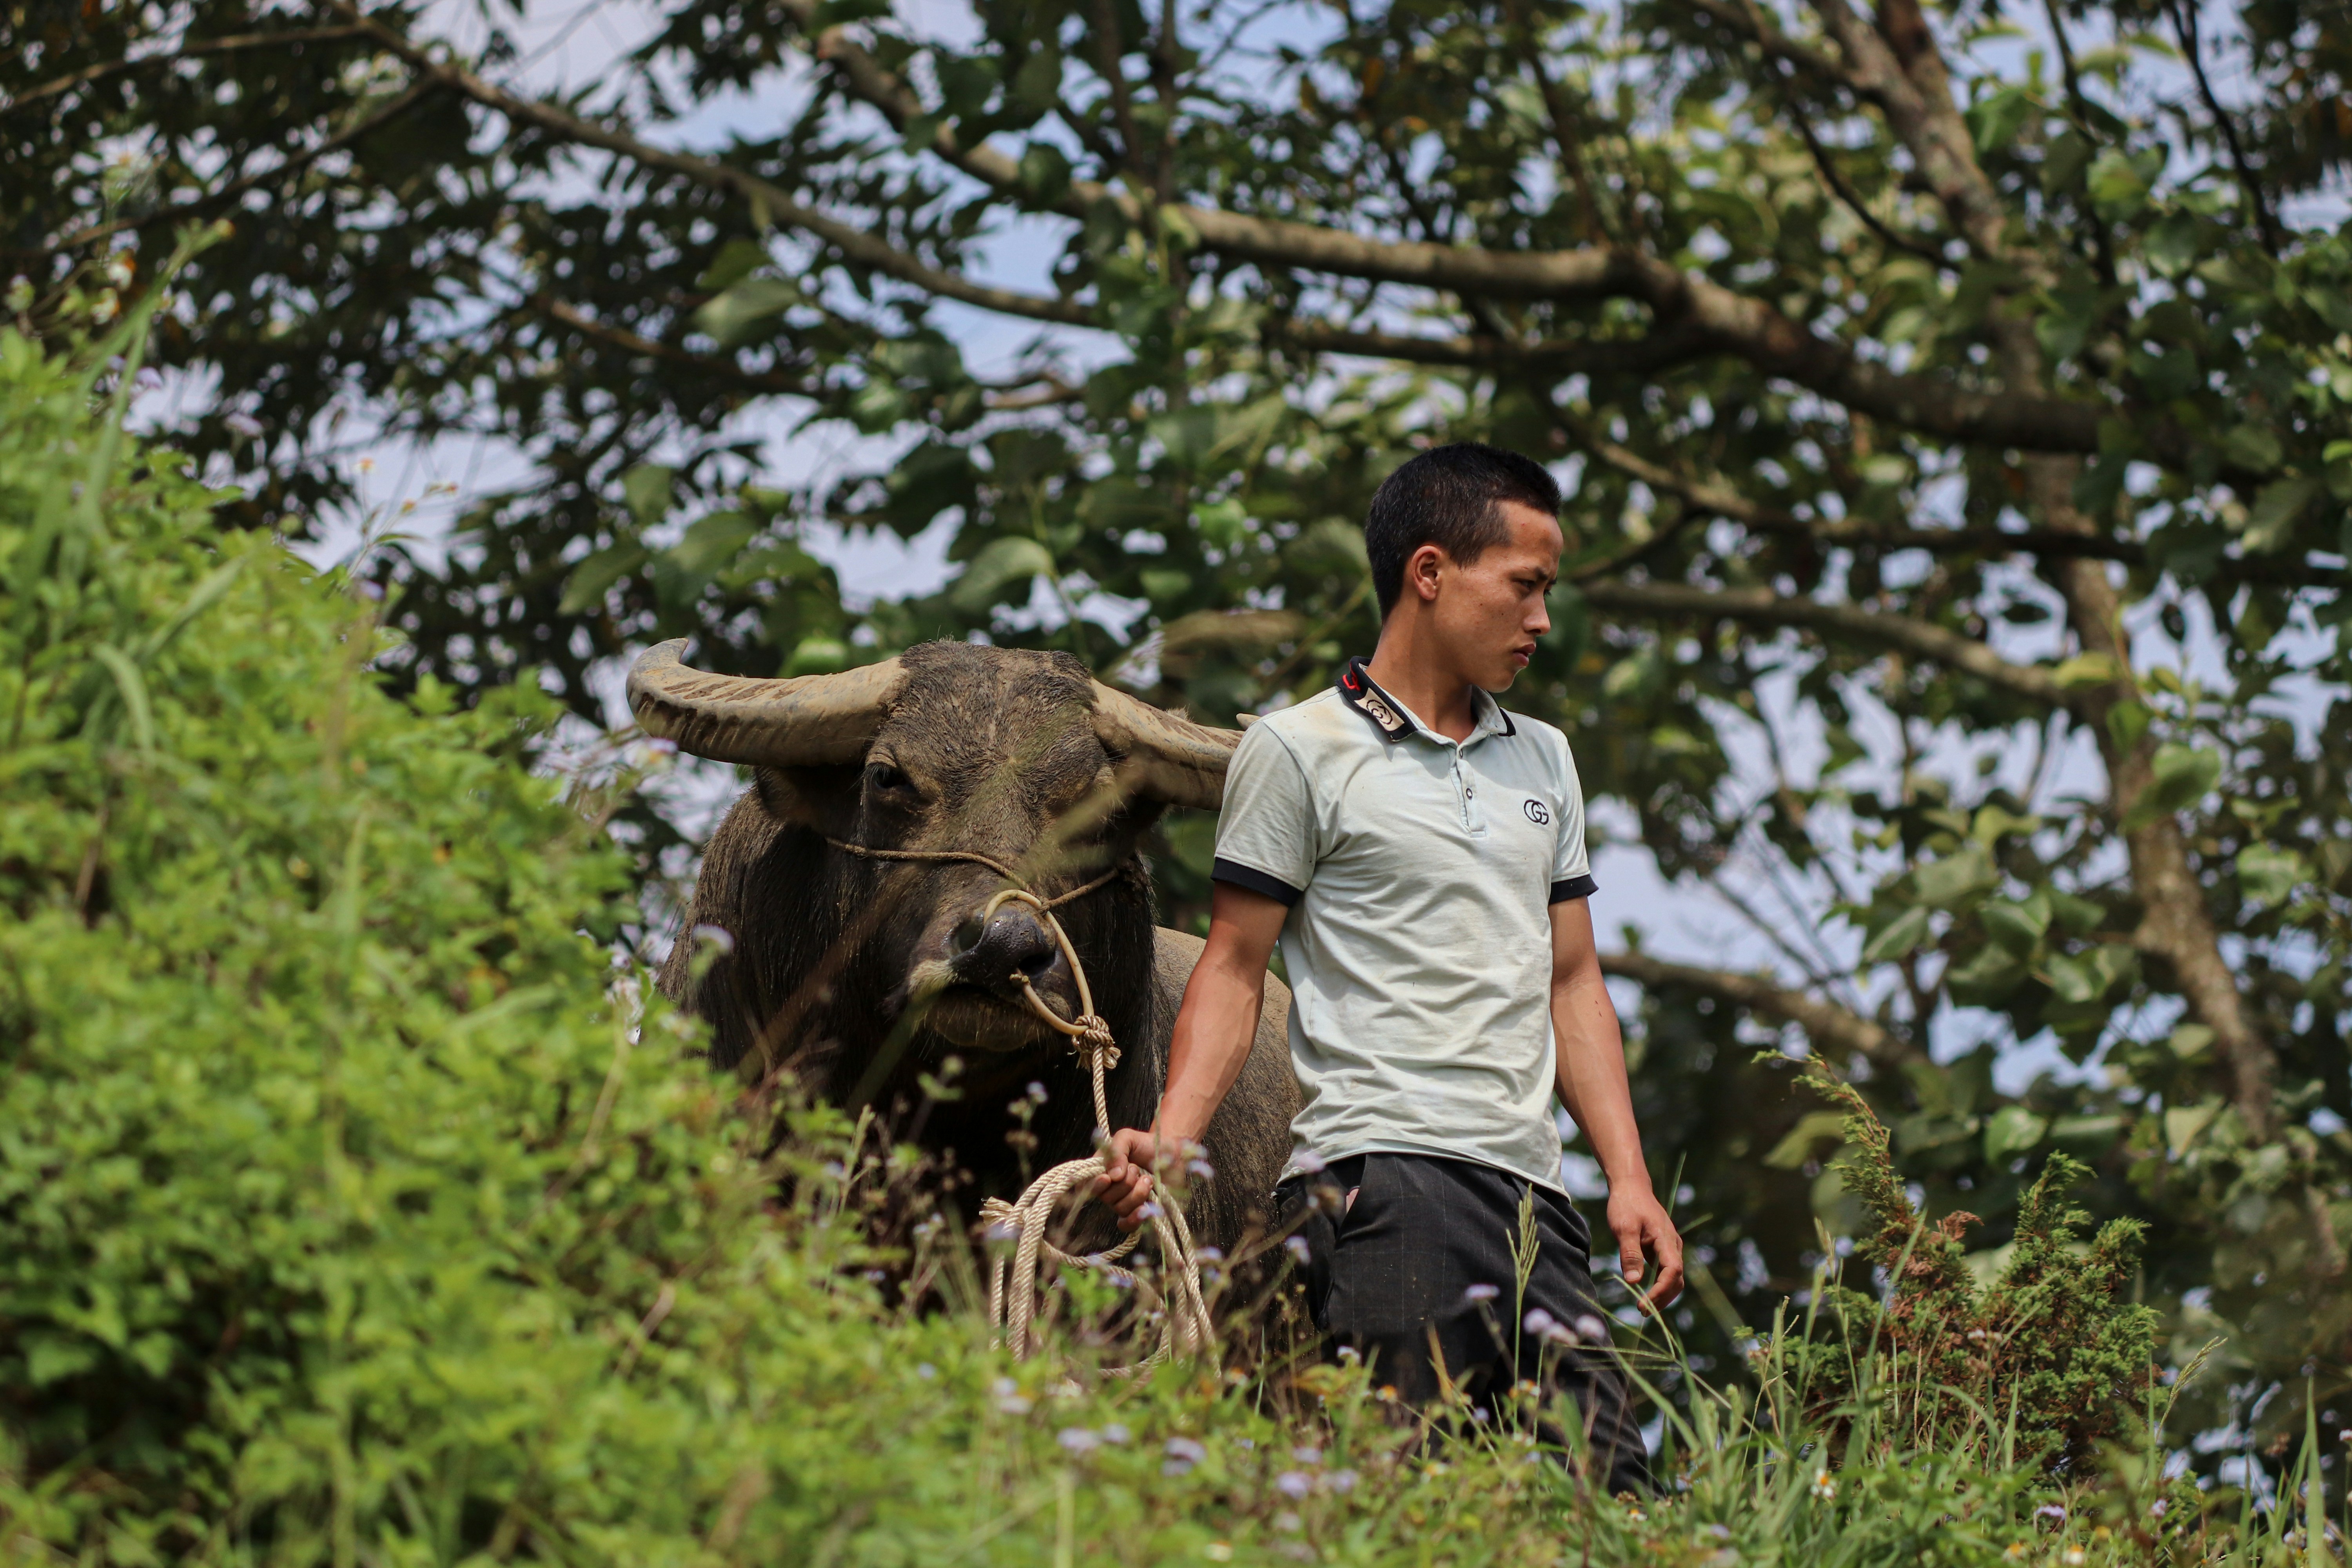 Families rearing buffaloes have shrunk in Dang, their future remains a question